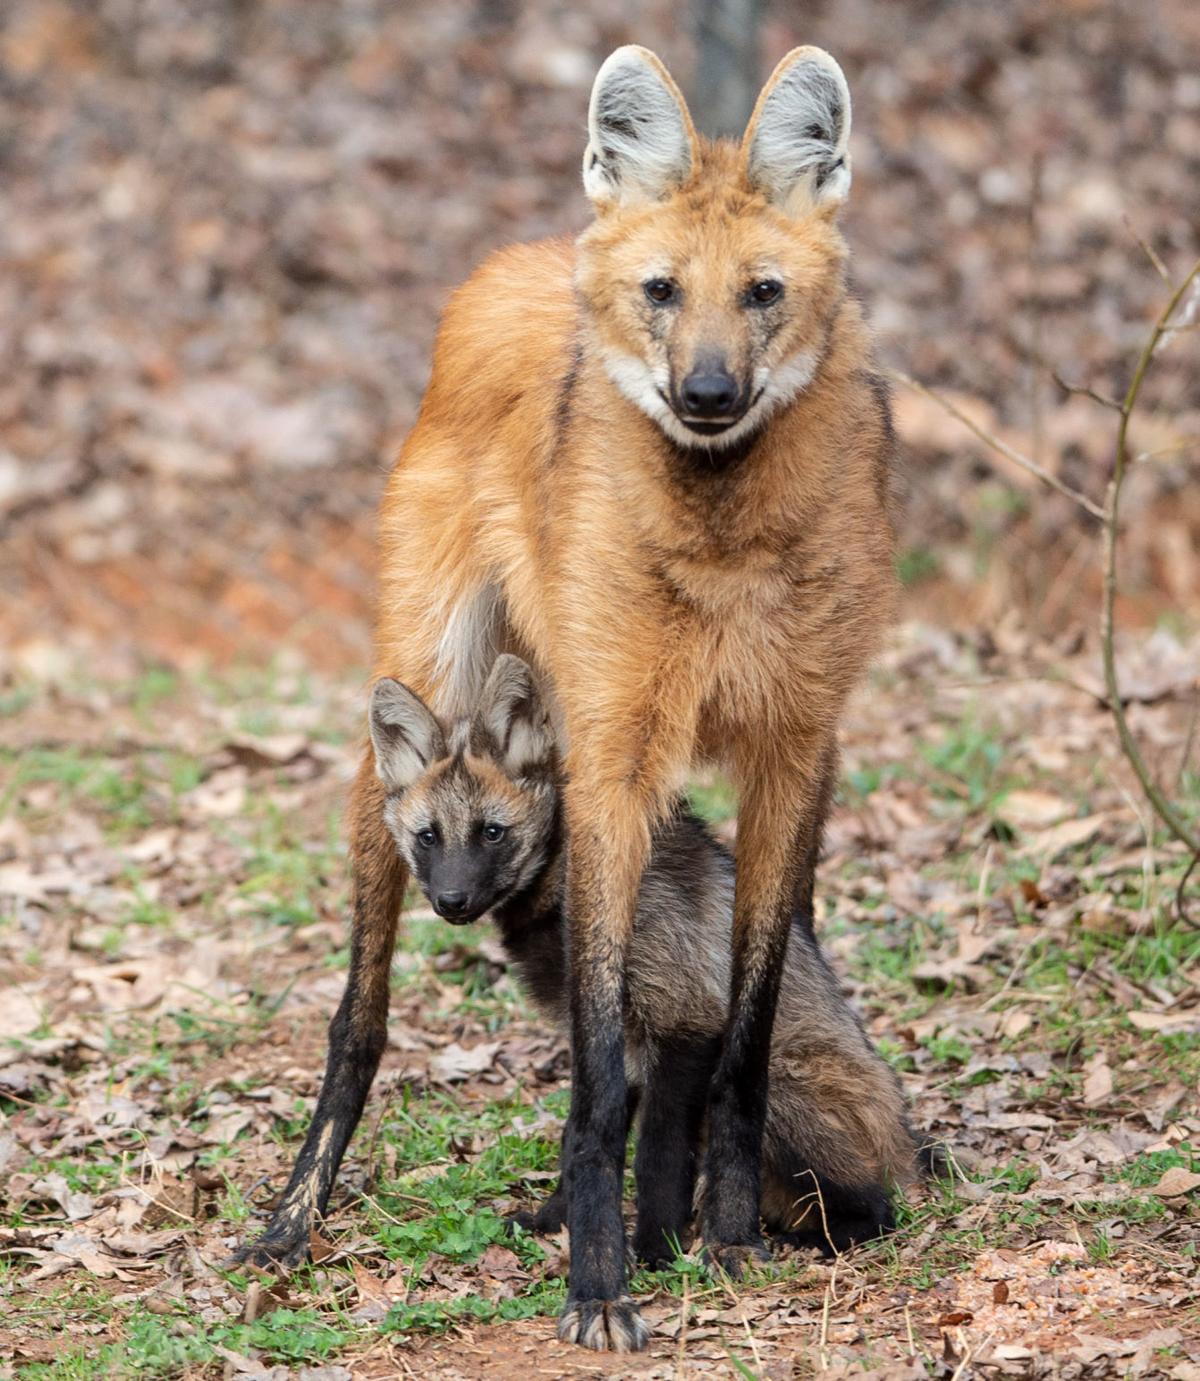 The 4 maned wolf pups now have names. What did the Greensboro Science Center choose?